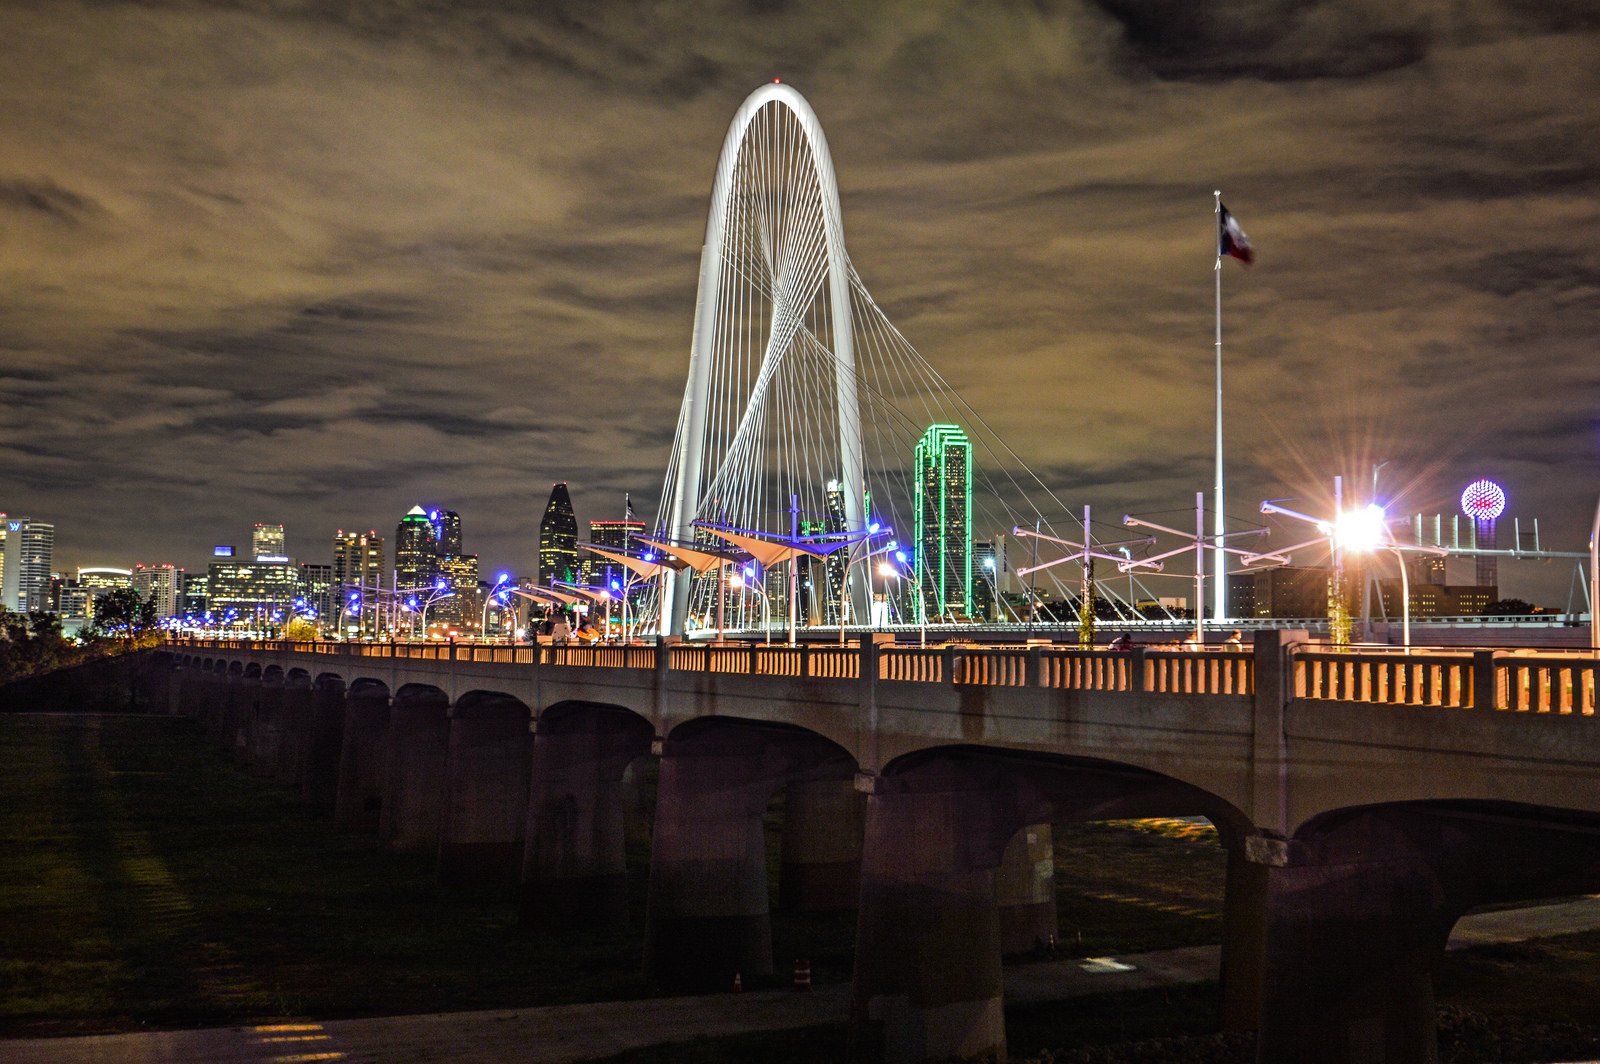 dallas, Architecture, Bridges, Cities, City, Texas, Night, Towers, Buildings, Usa, Downtown, Oak lawn, Lakewood, Fair, Park, Lake highland, White rock lake, Oak cliff, Offices, Storehouses, Stores, Roads, Highwa Wallpaper